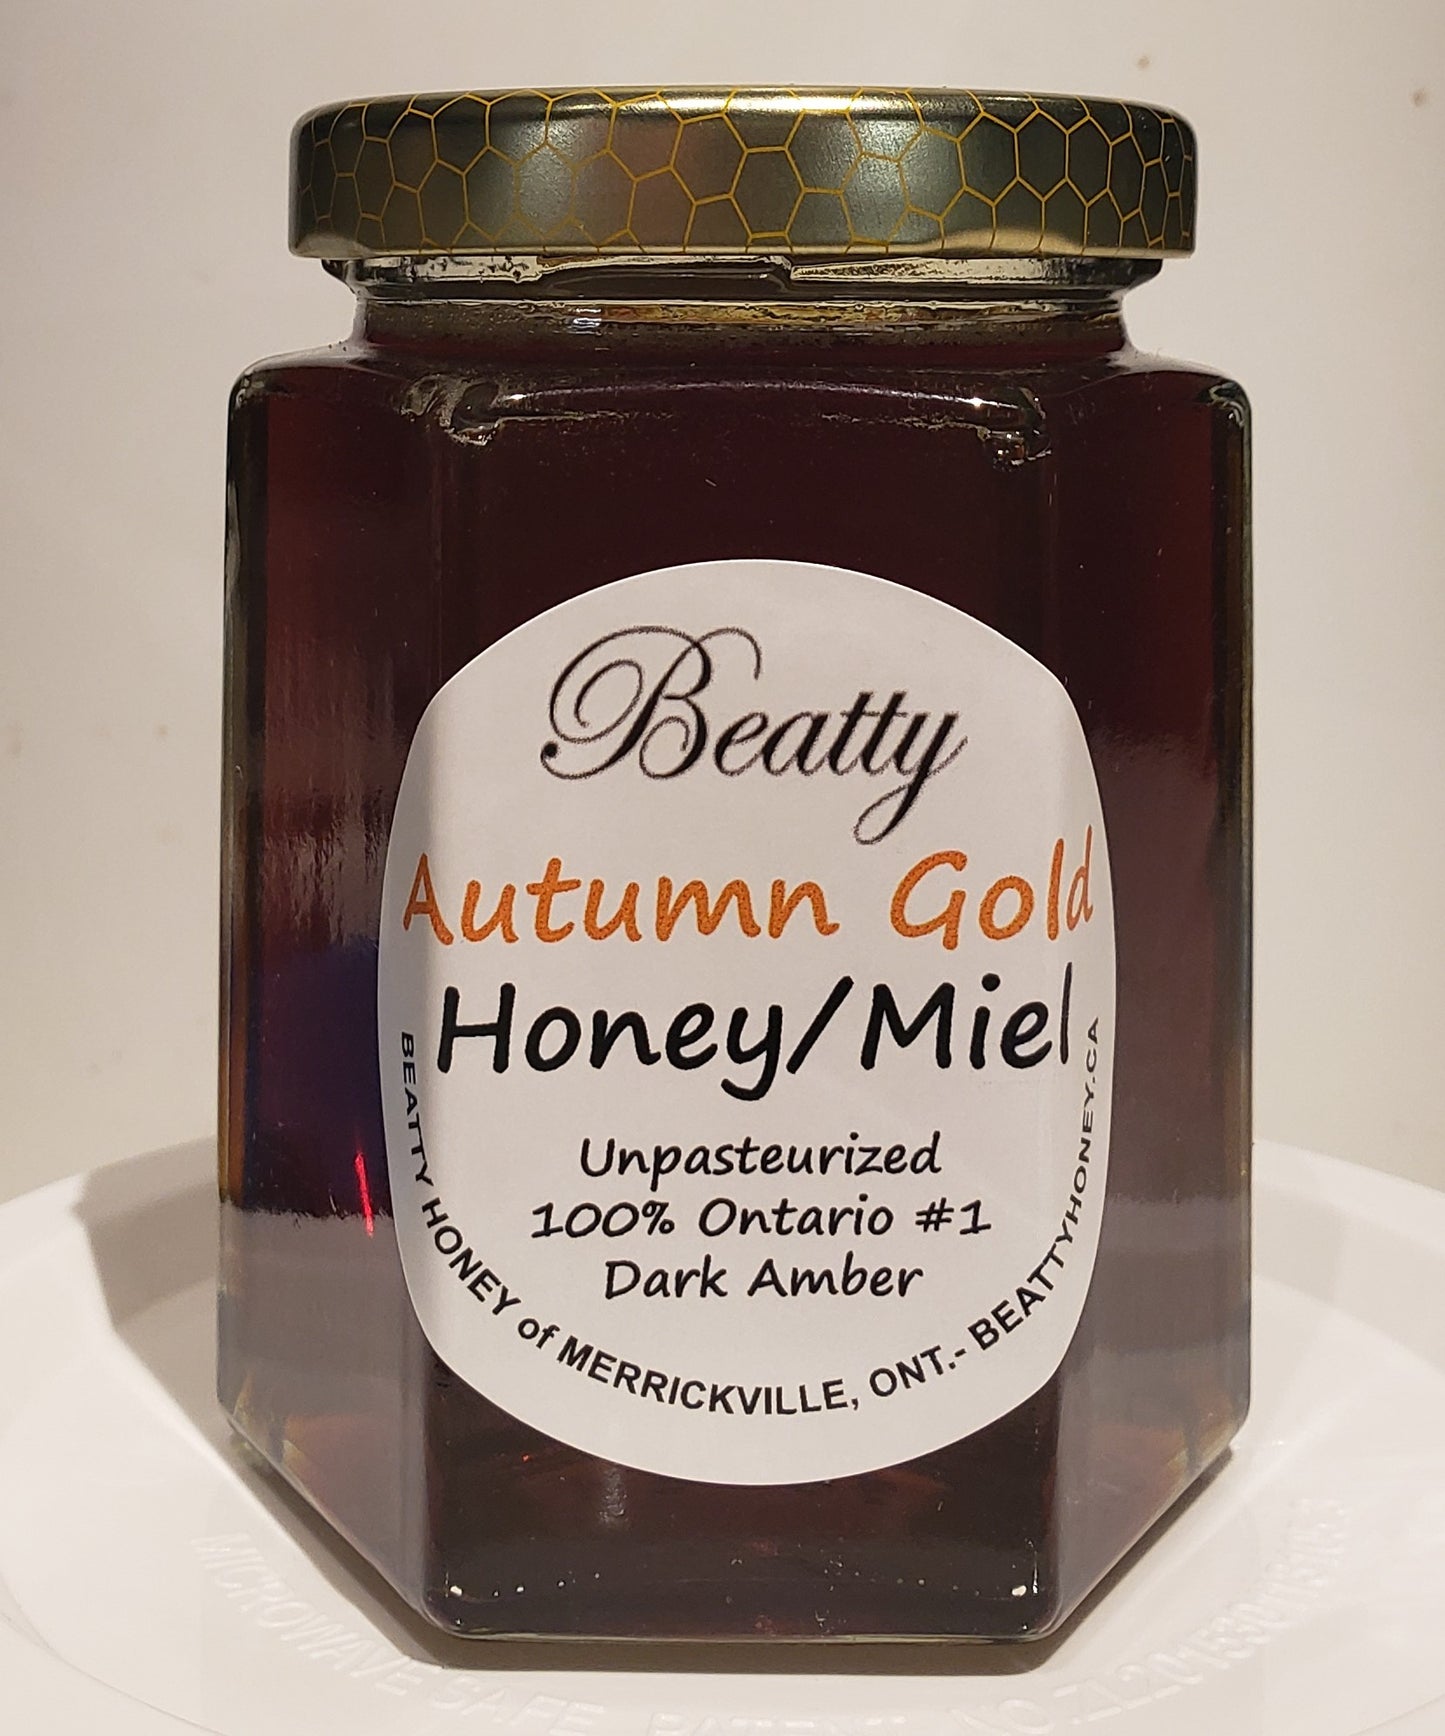 A rich smooth honey made from the blossoms of late blooming flowers. 